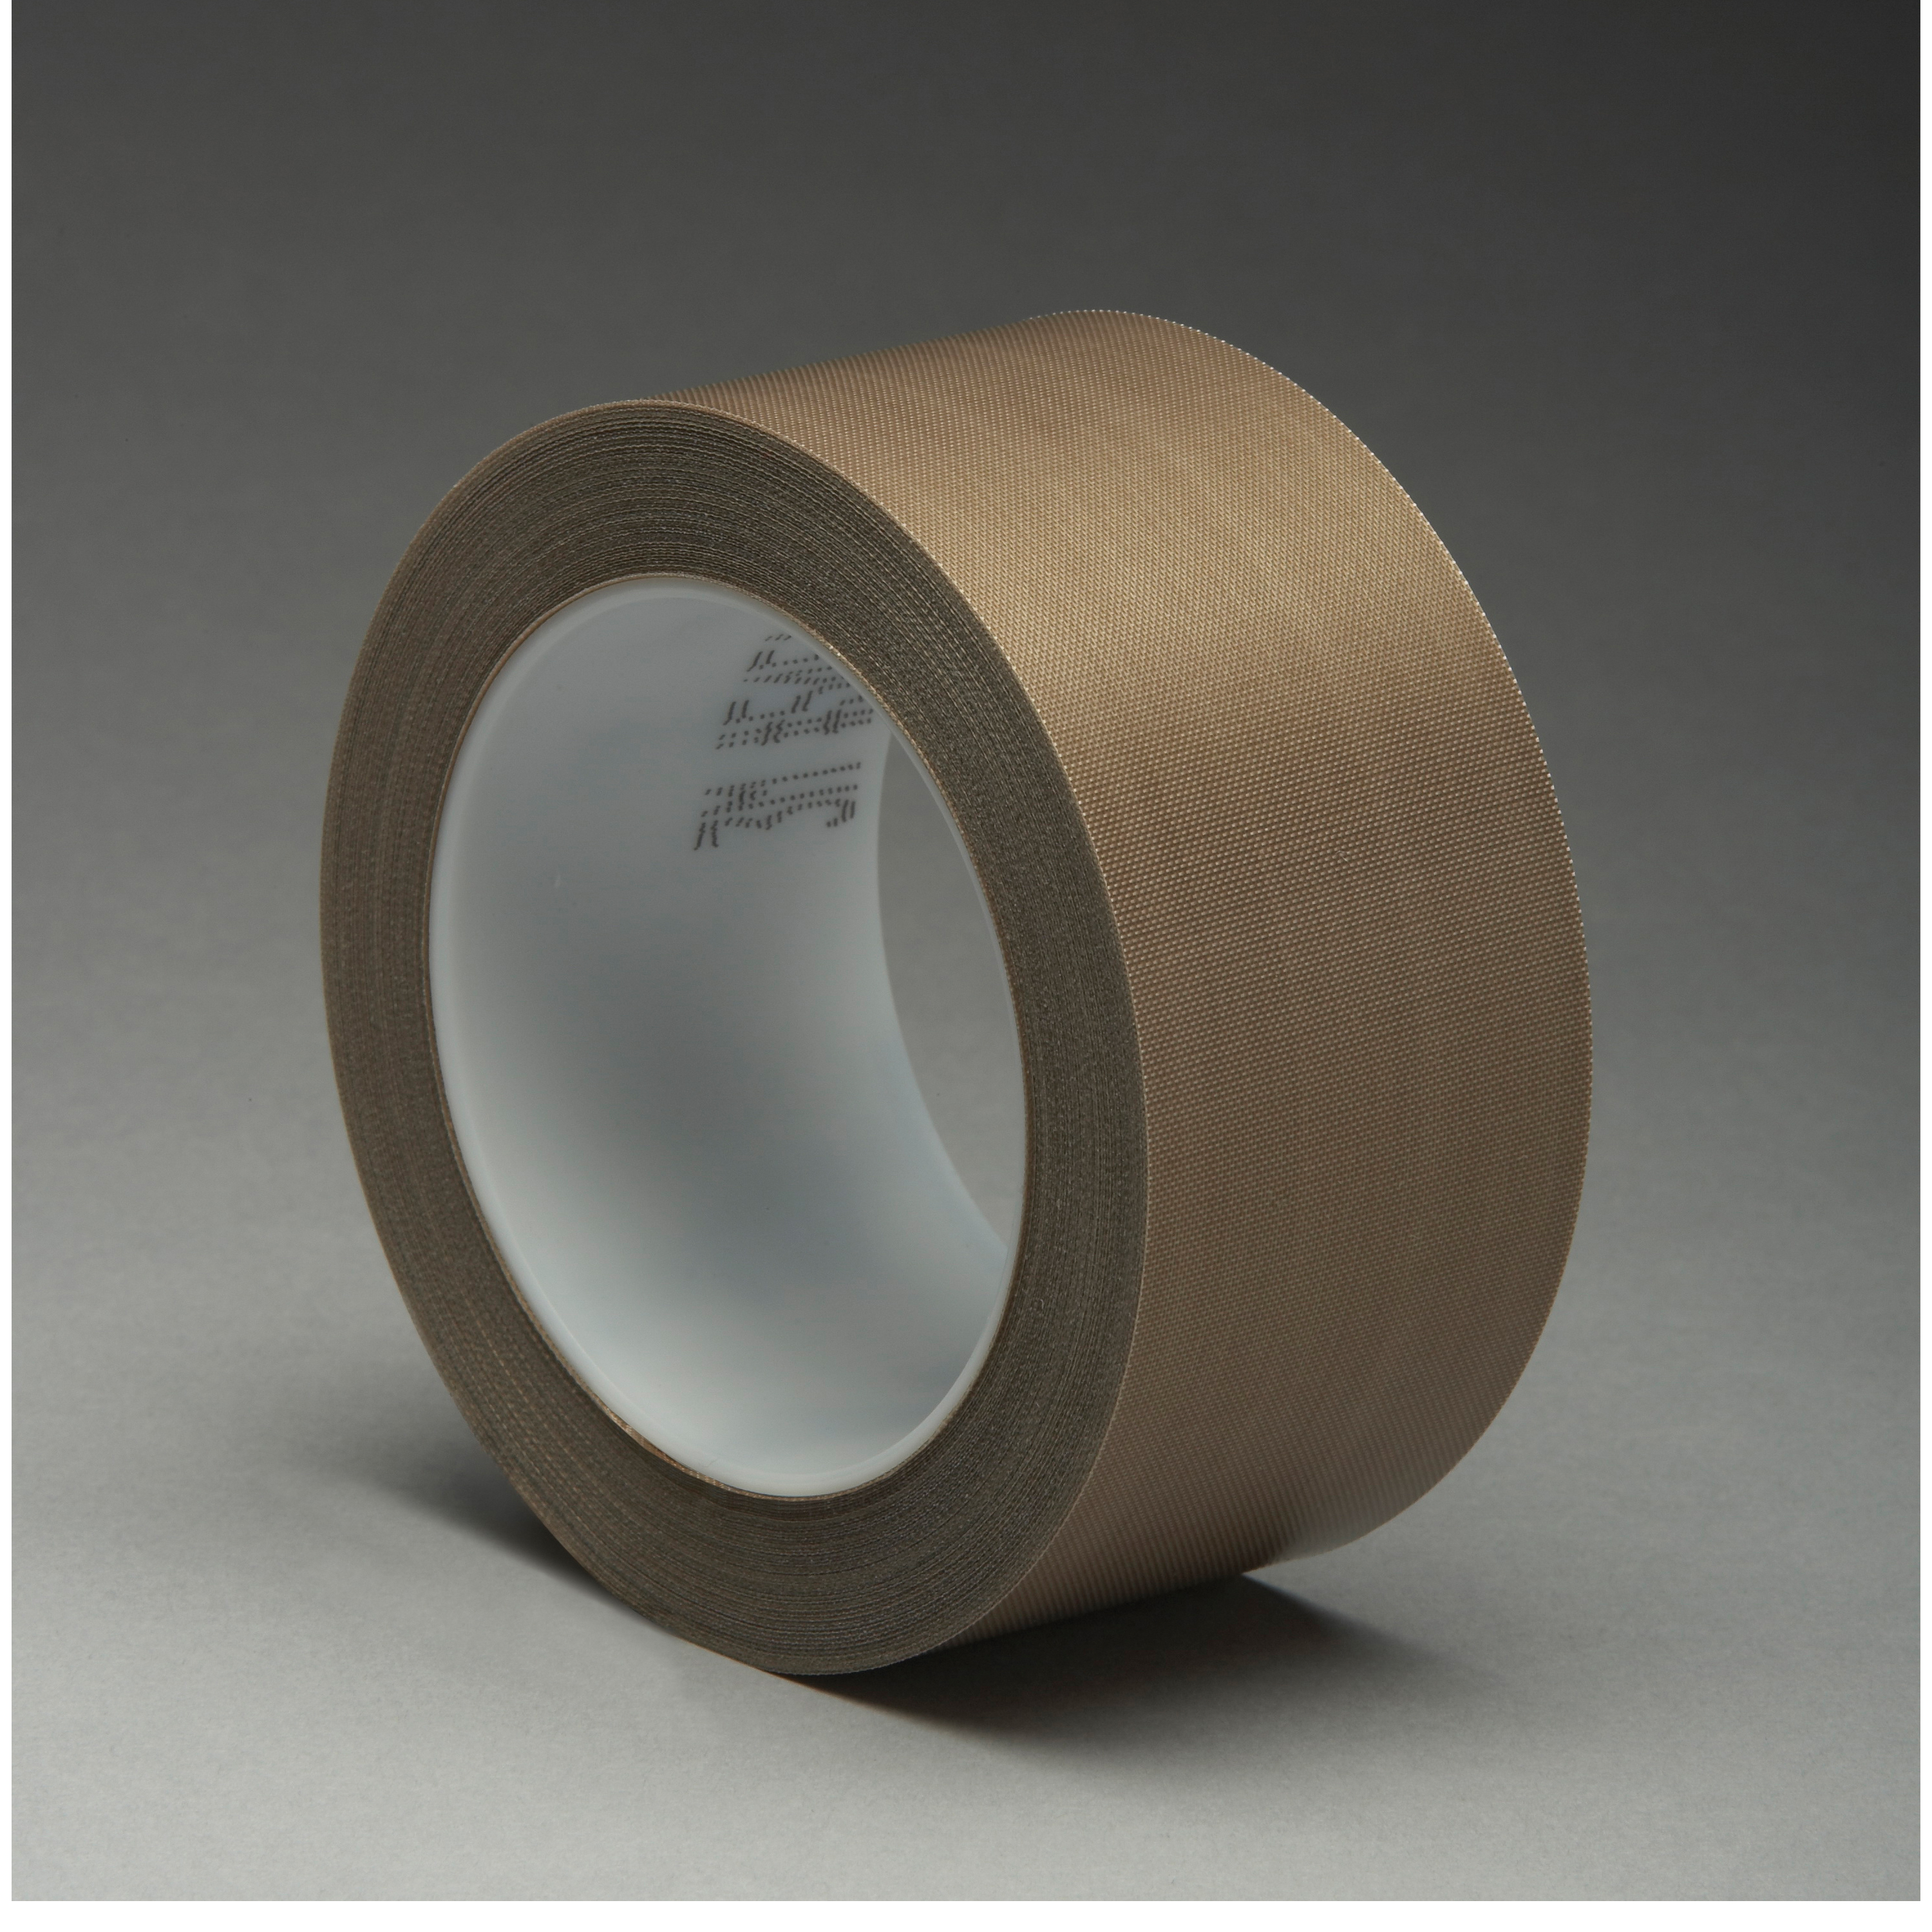 3M™ 021200-16150 Pressure Sensitive Glass Cloth Tape, 36 yd L x 1/2 in W, 5.6 mil THK, Silicon Adhesive, Woven Glass Cloth Impregnated with PTFE Backing, Brown